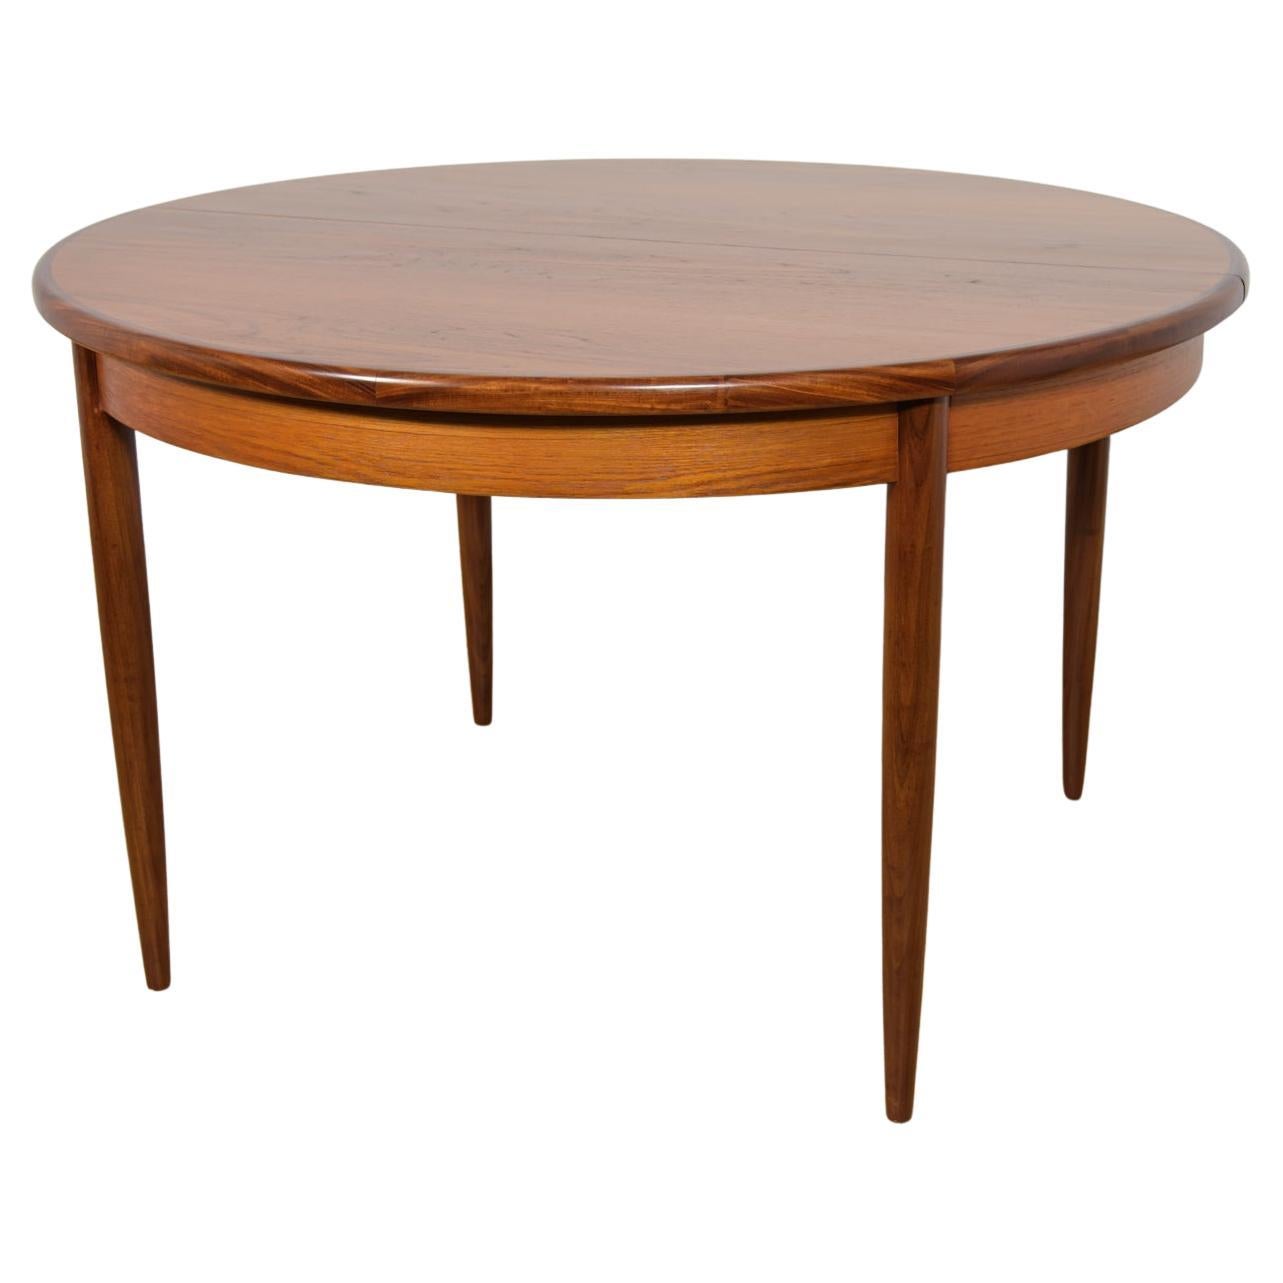 Mid-Century Teak Round Fresco Dining Table from G-Plan, United Knigdom, 1960s For Sale